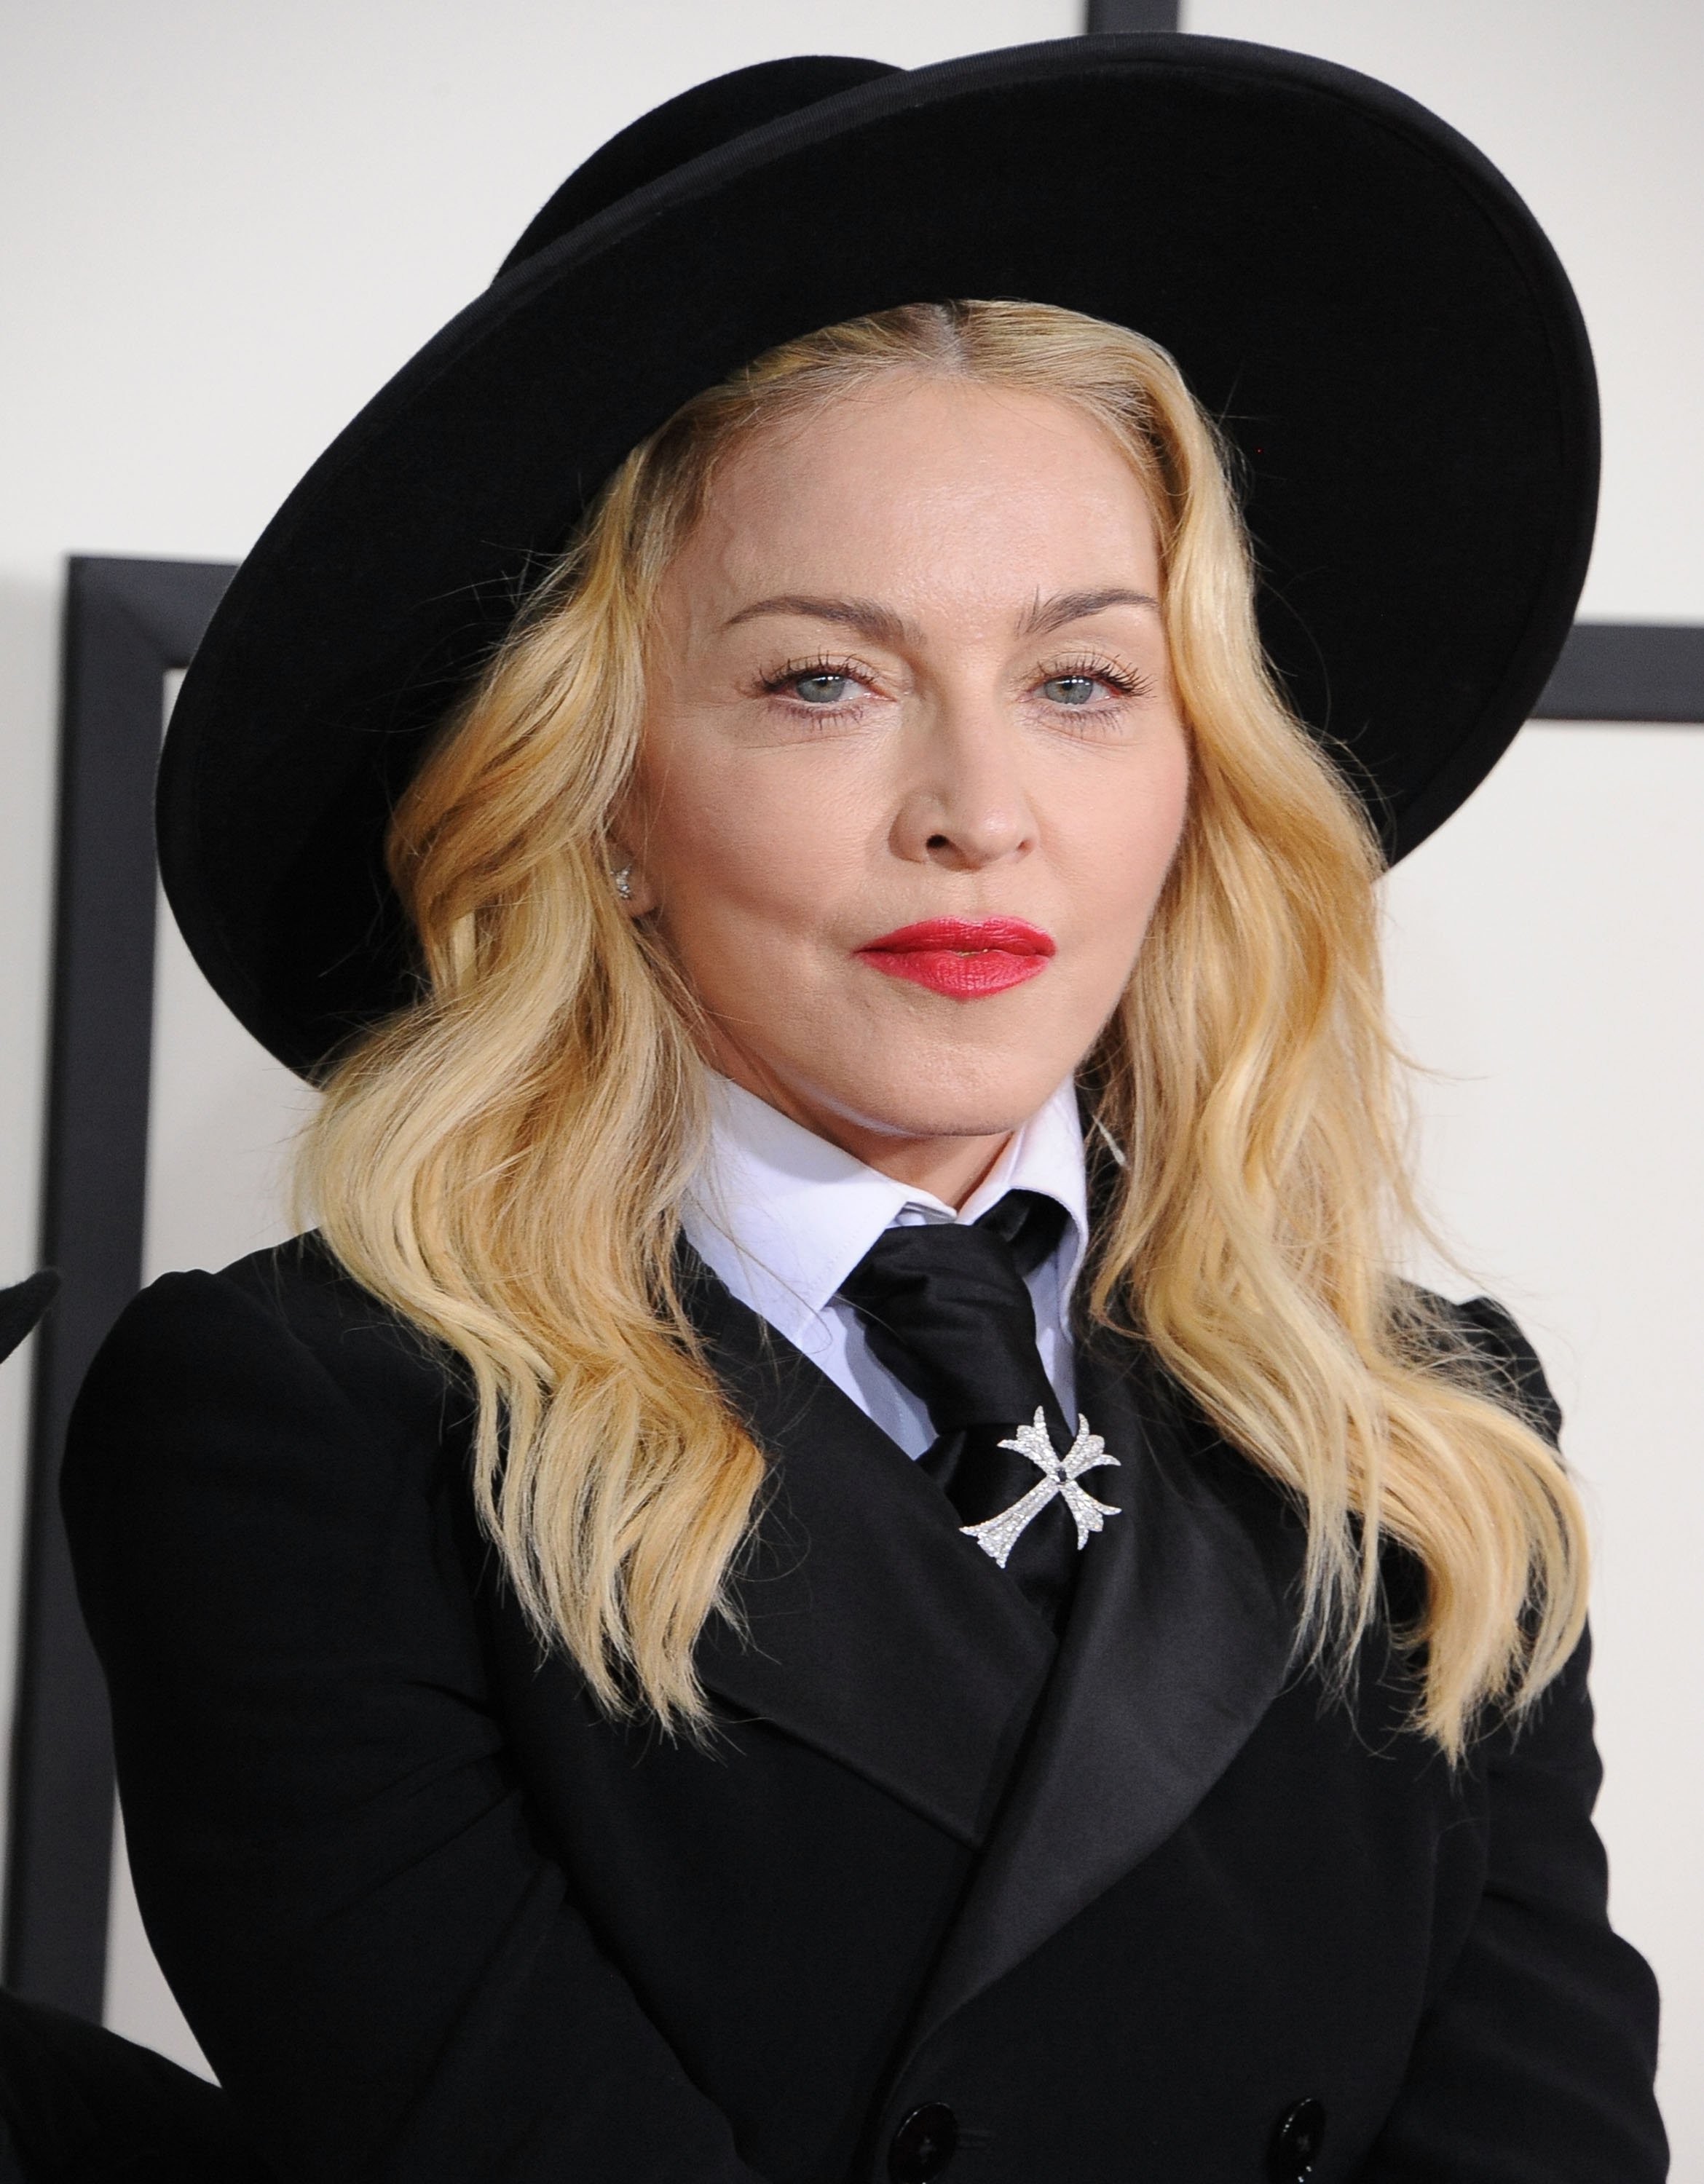 Madonna at the GRAMMY Awards on January 26, 2014 in Los Angeles. | Source: Getty Images